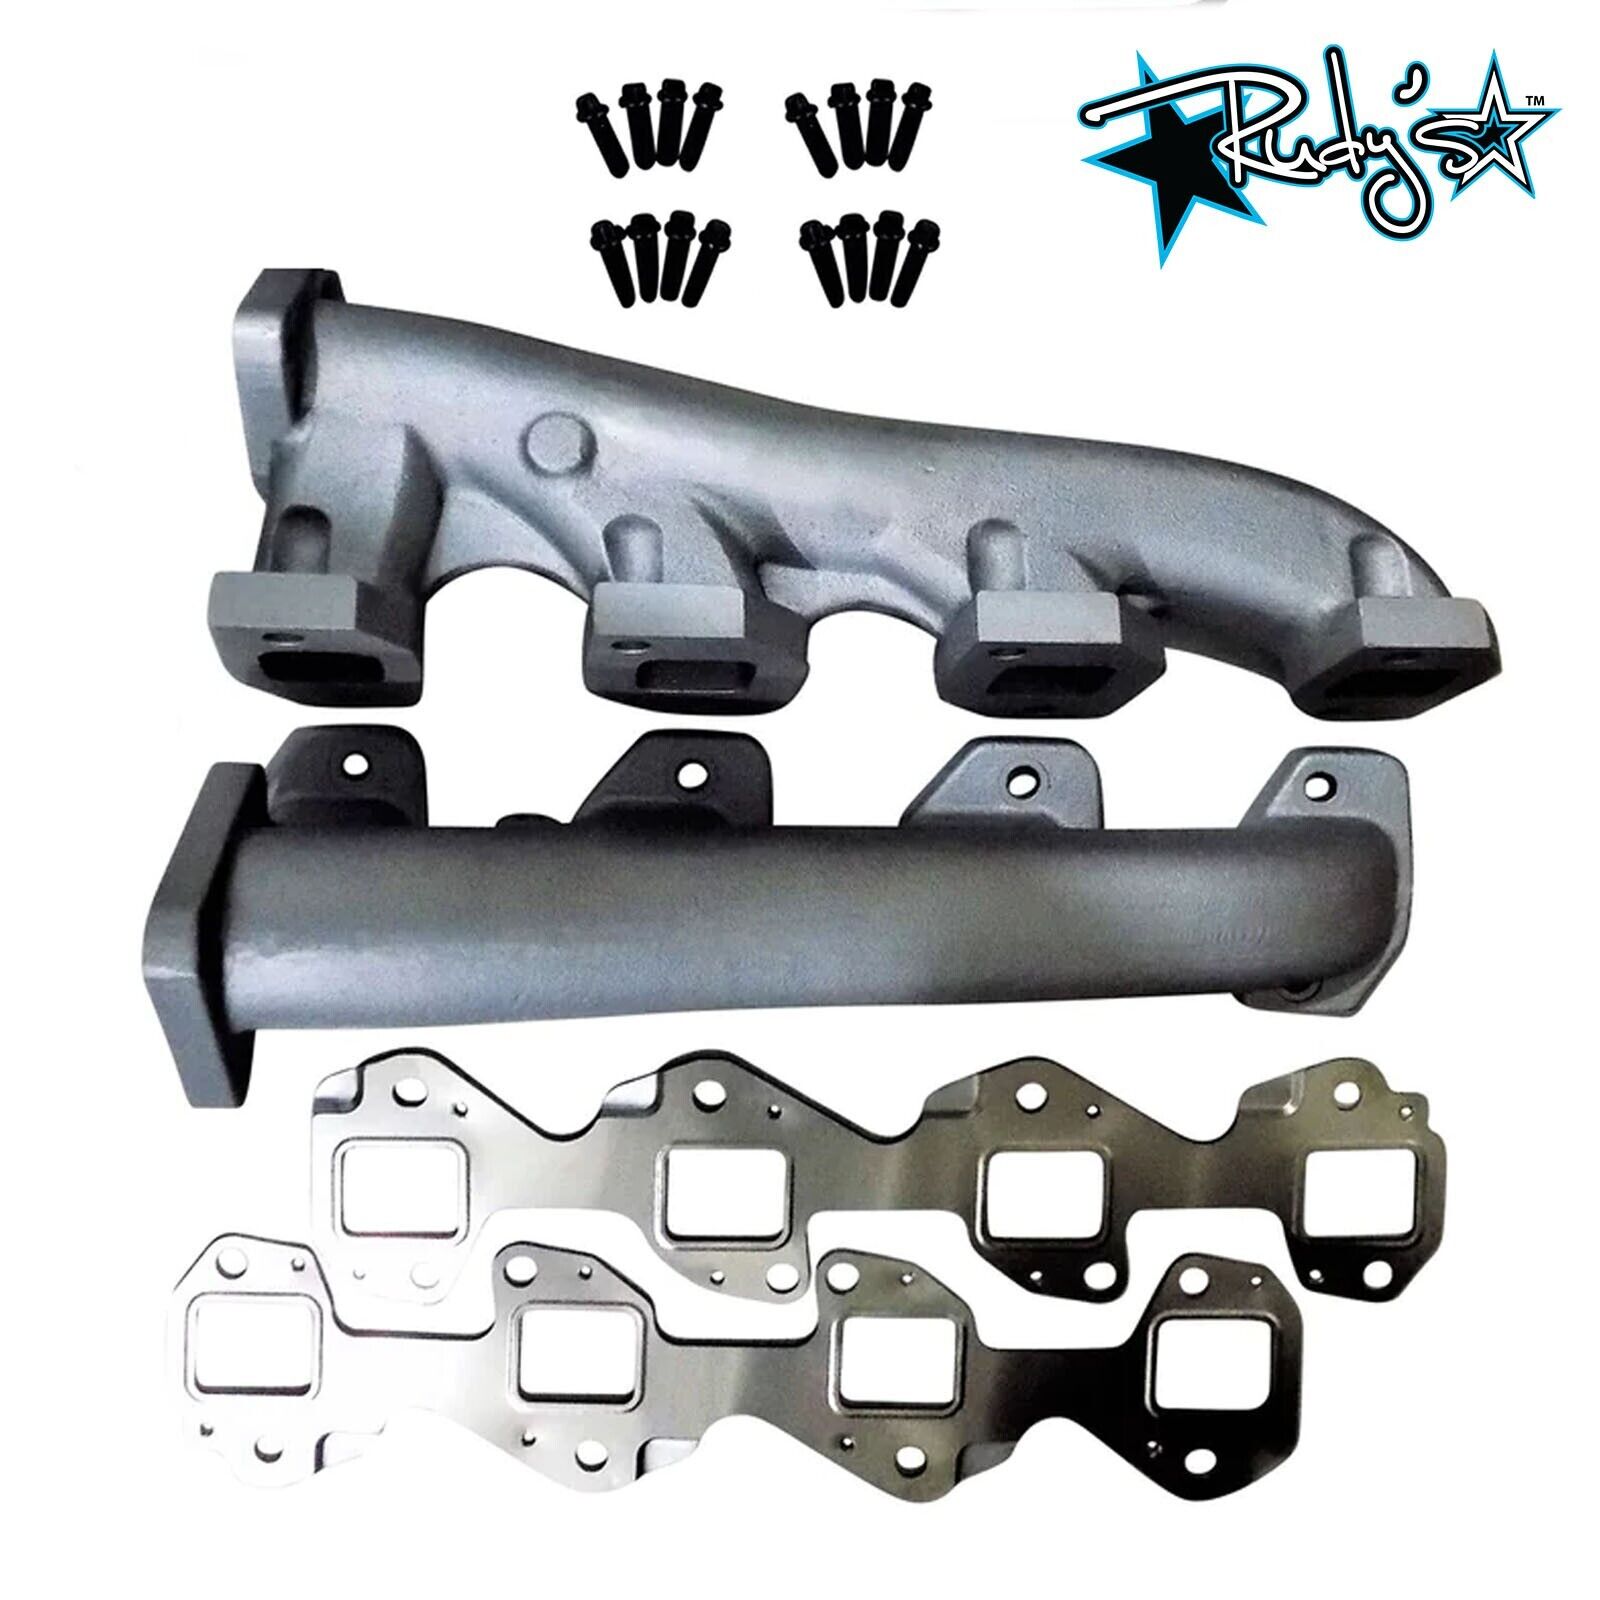 Rudy's High Flow Race Exhaust Manifolds & Gaskets For 2001-2004 GM 6.6L Duramax